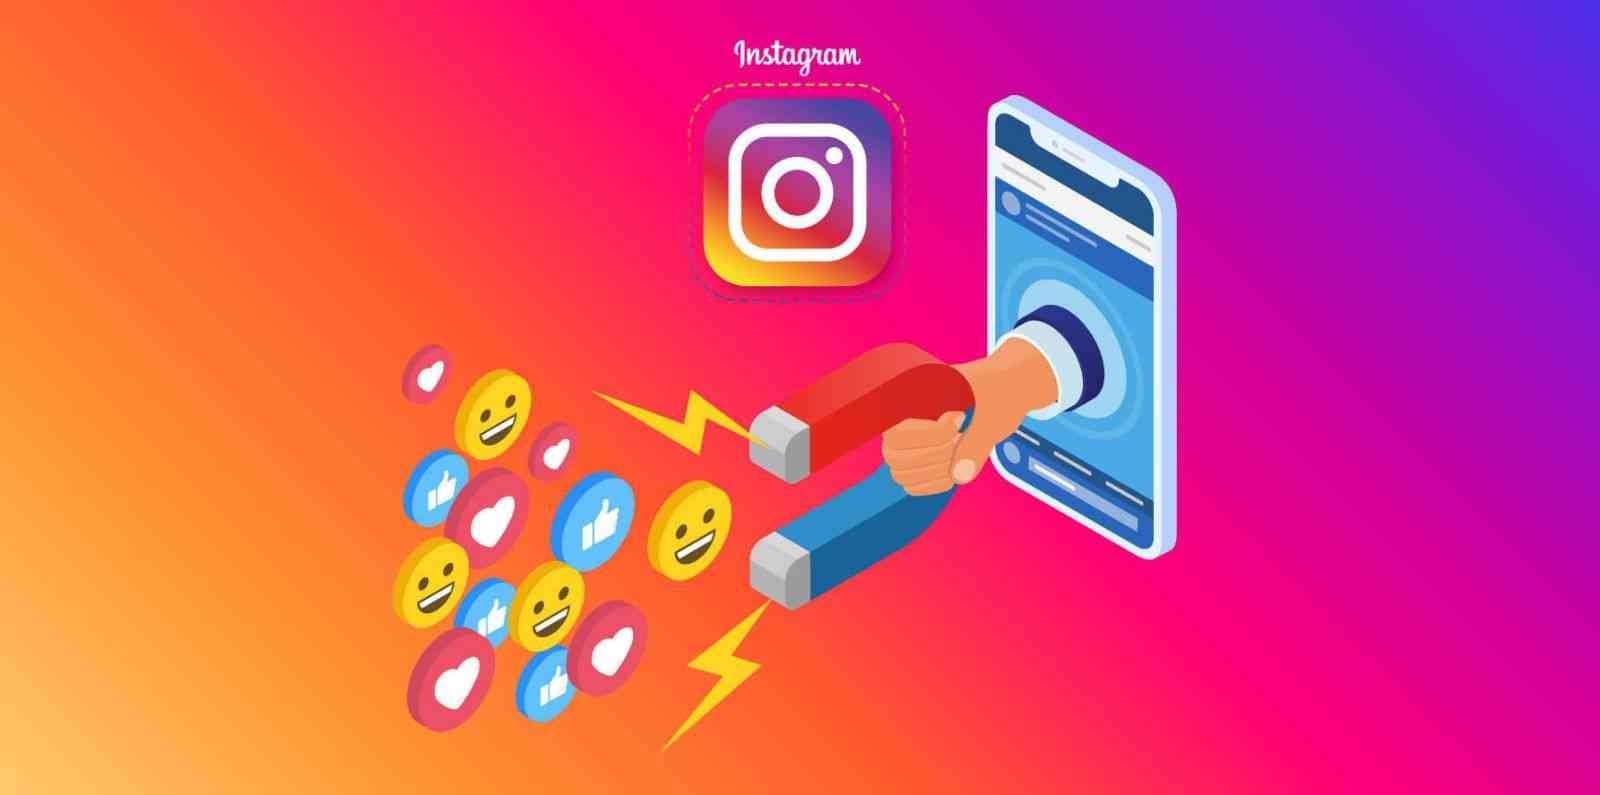  Buy Instagram 10k Followers - Fast, Reliable and Affordable